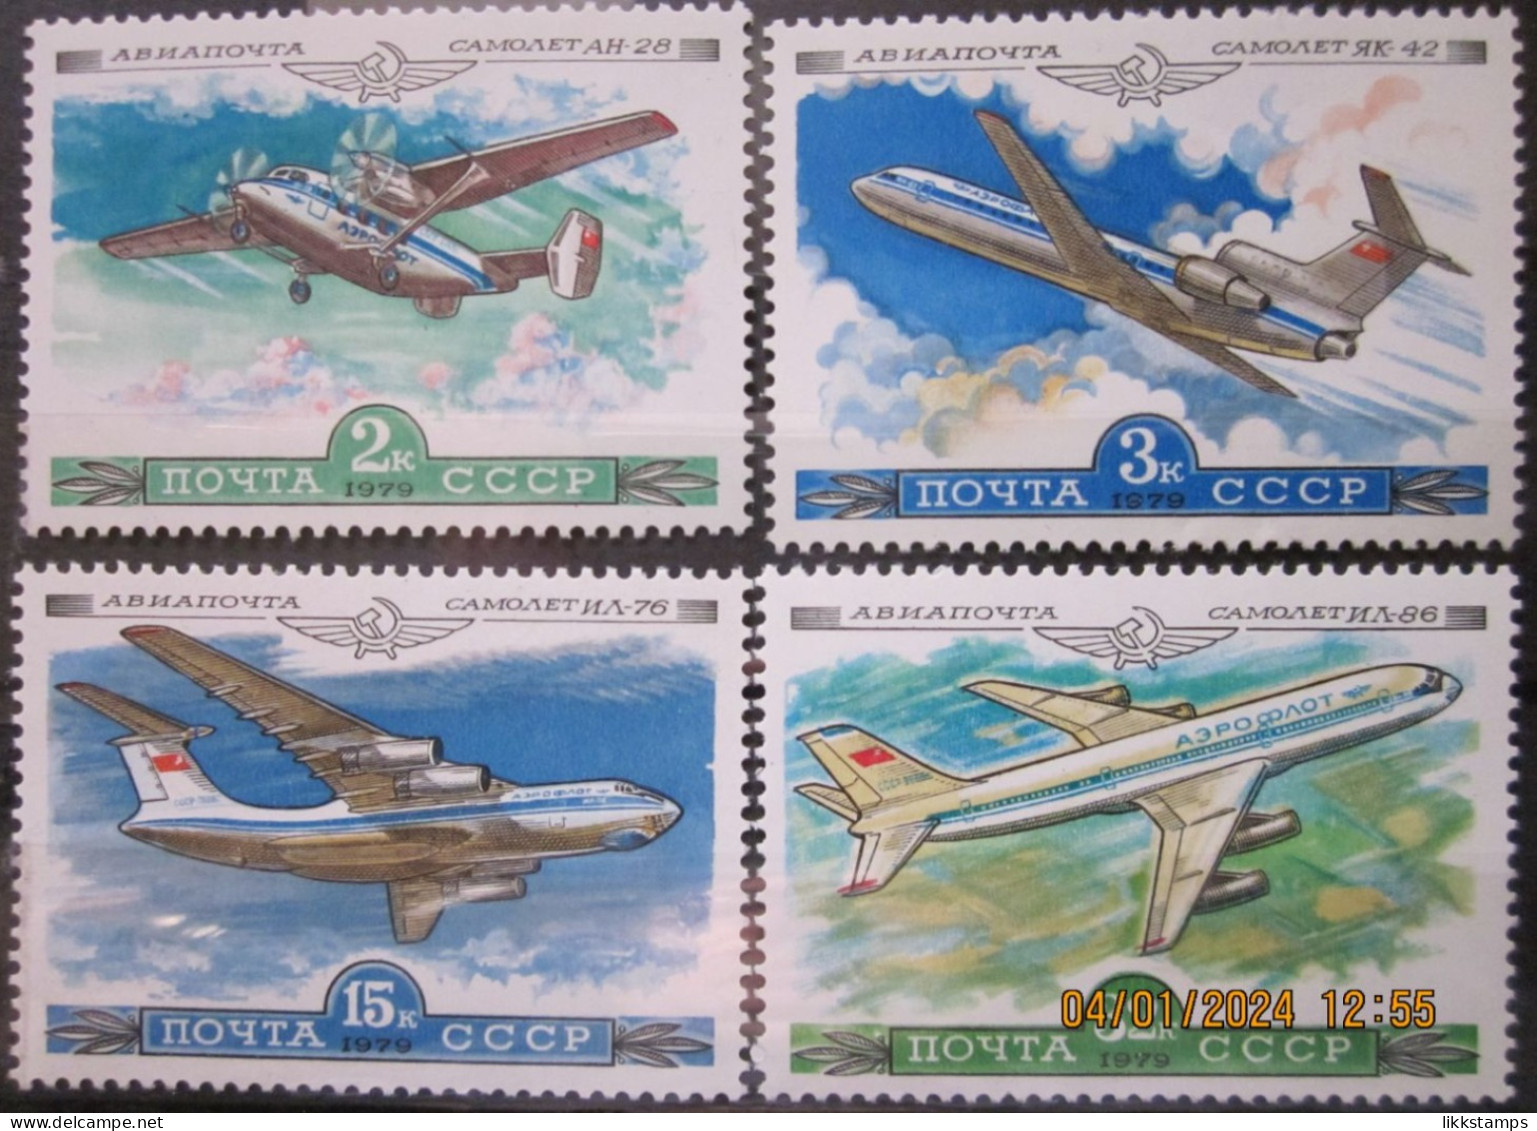 RUSSIA ~ 1979 ~ S.G. NUMBERS 4883 - 4884 + 4886 - 4887, ~ AIRCRAFT. ~ MNH #03596 - Nuevos